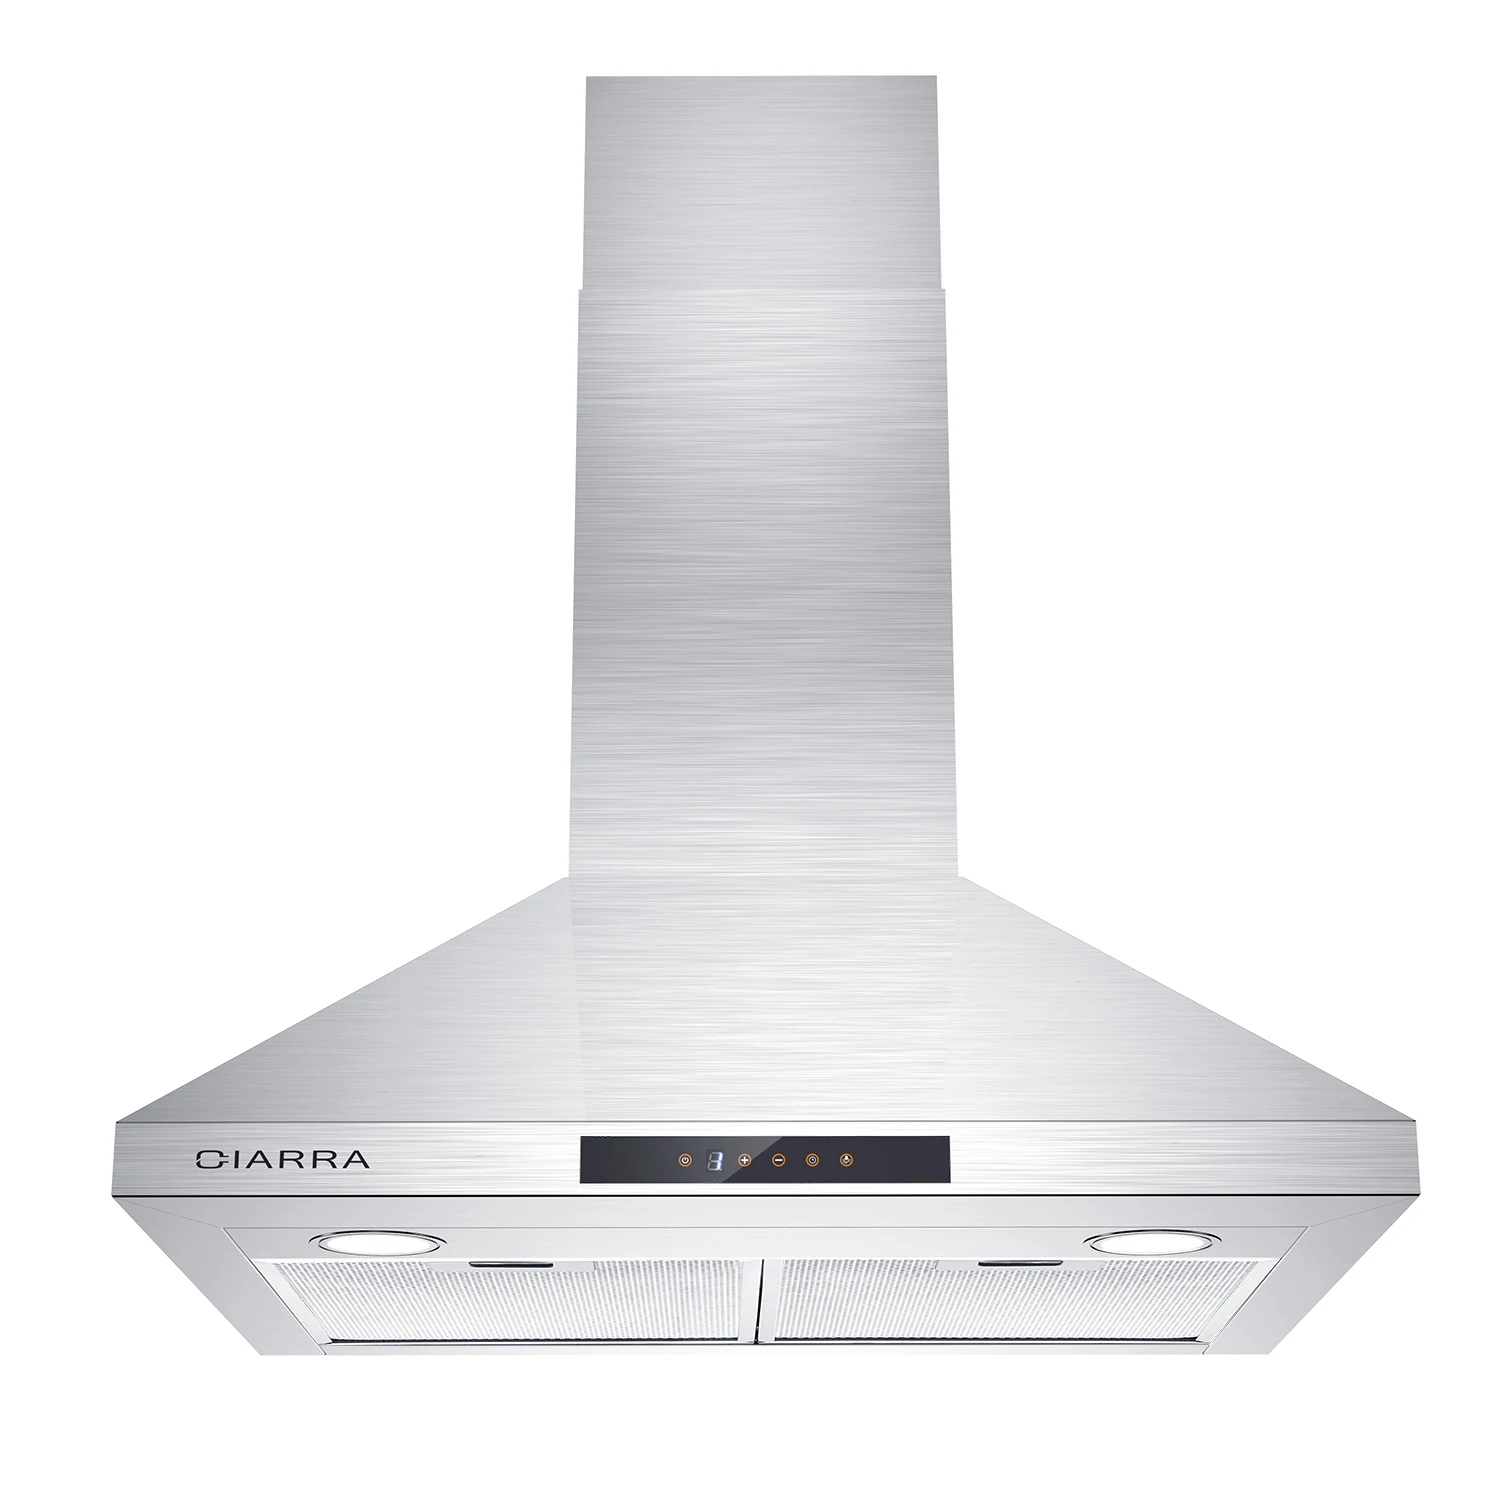 

CIARRA CAS75206 Range Hood 30 inch, Stove Vent for Kitchen, Wall Mount Extractor Fan Stainless Steel Touch Control 450 CFM